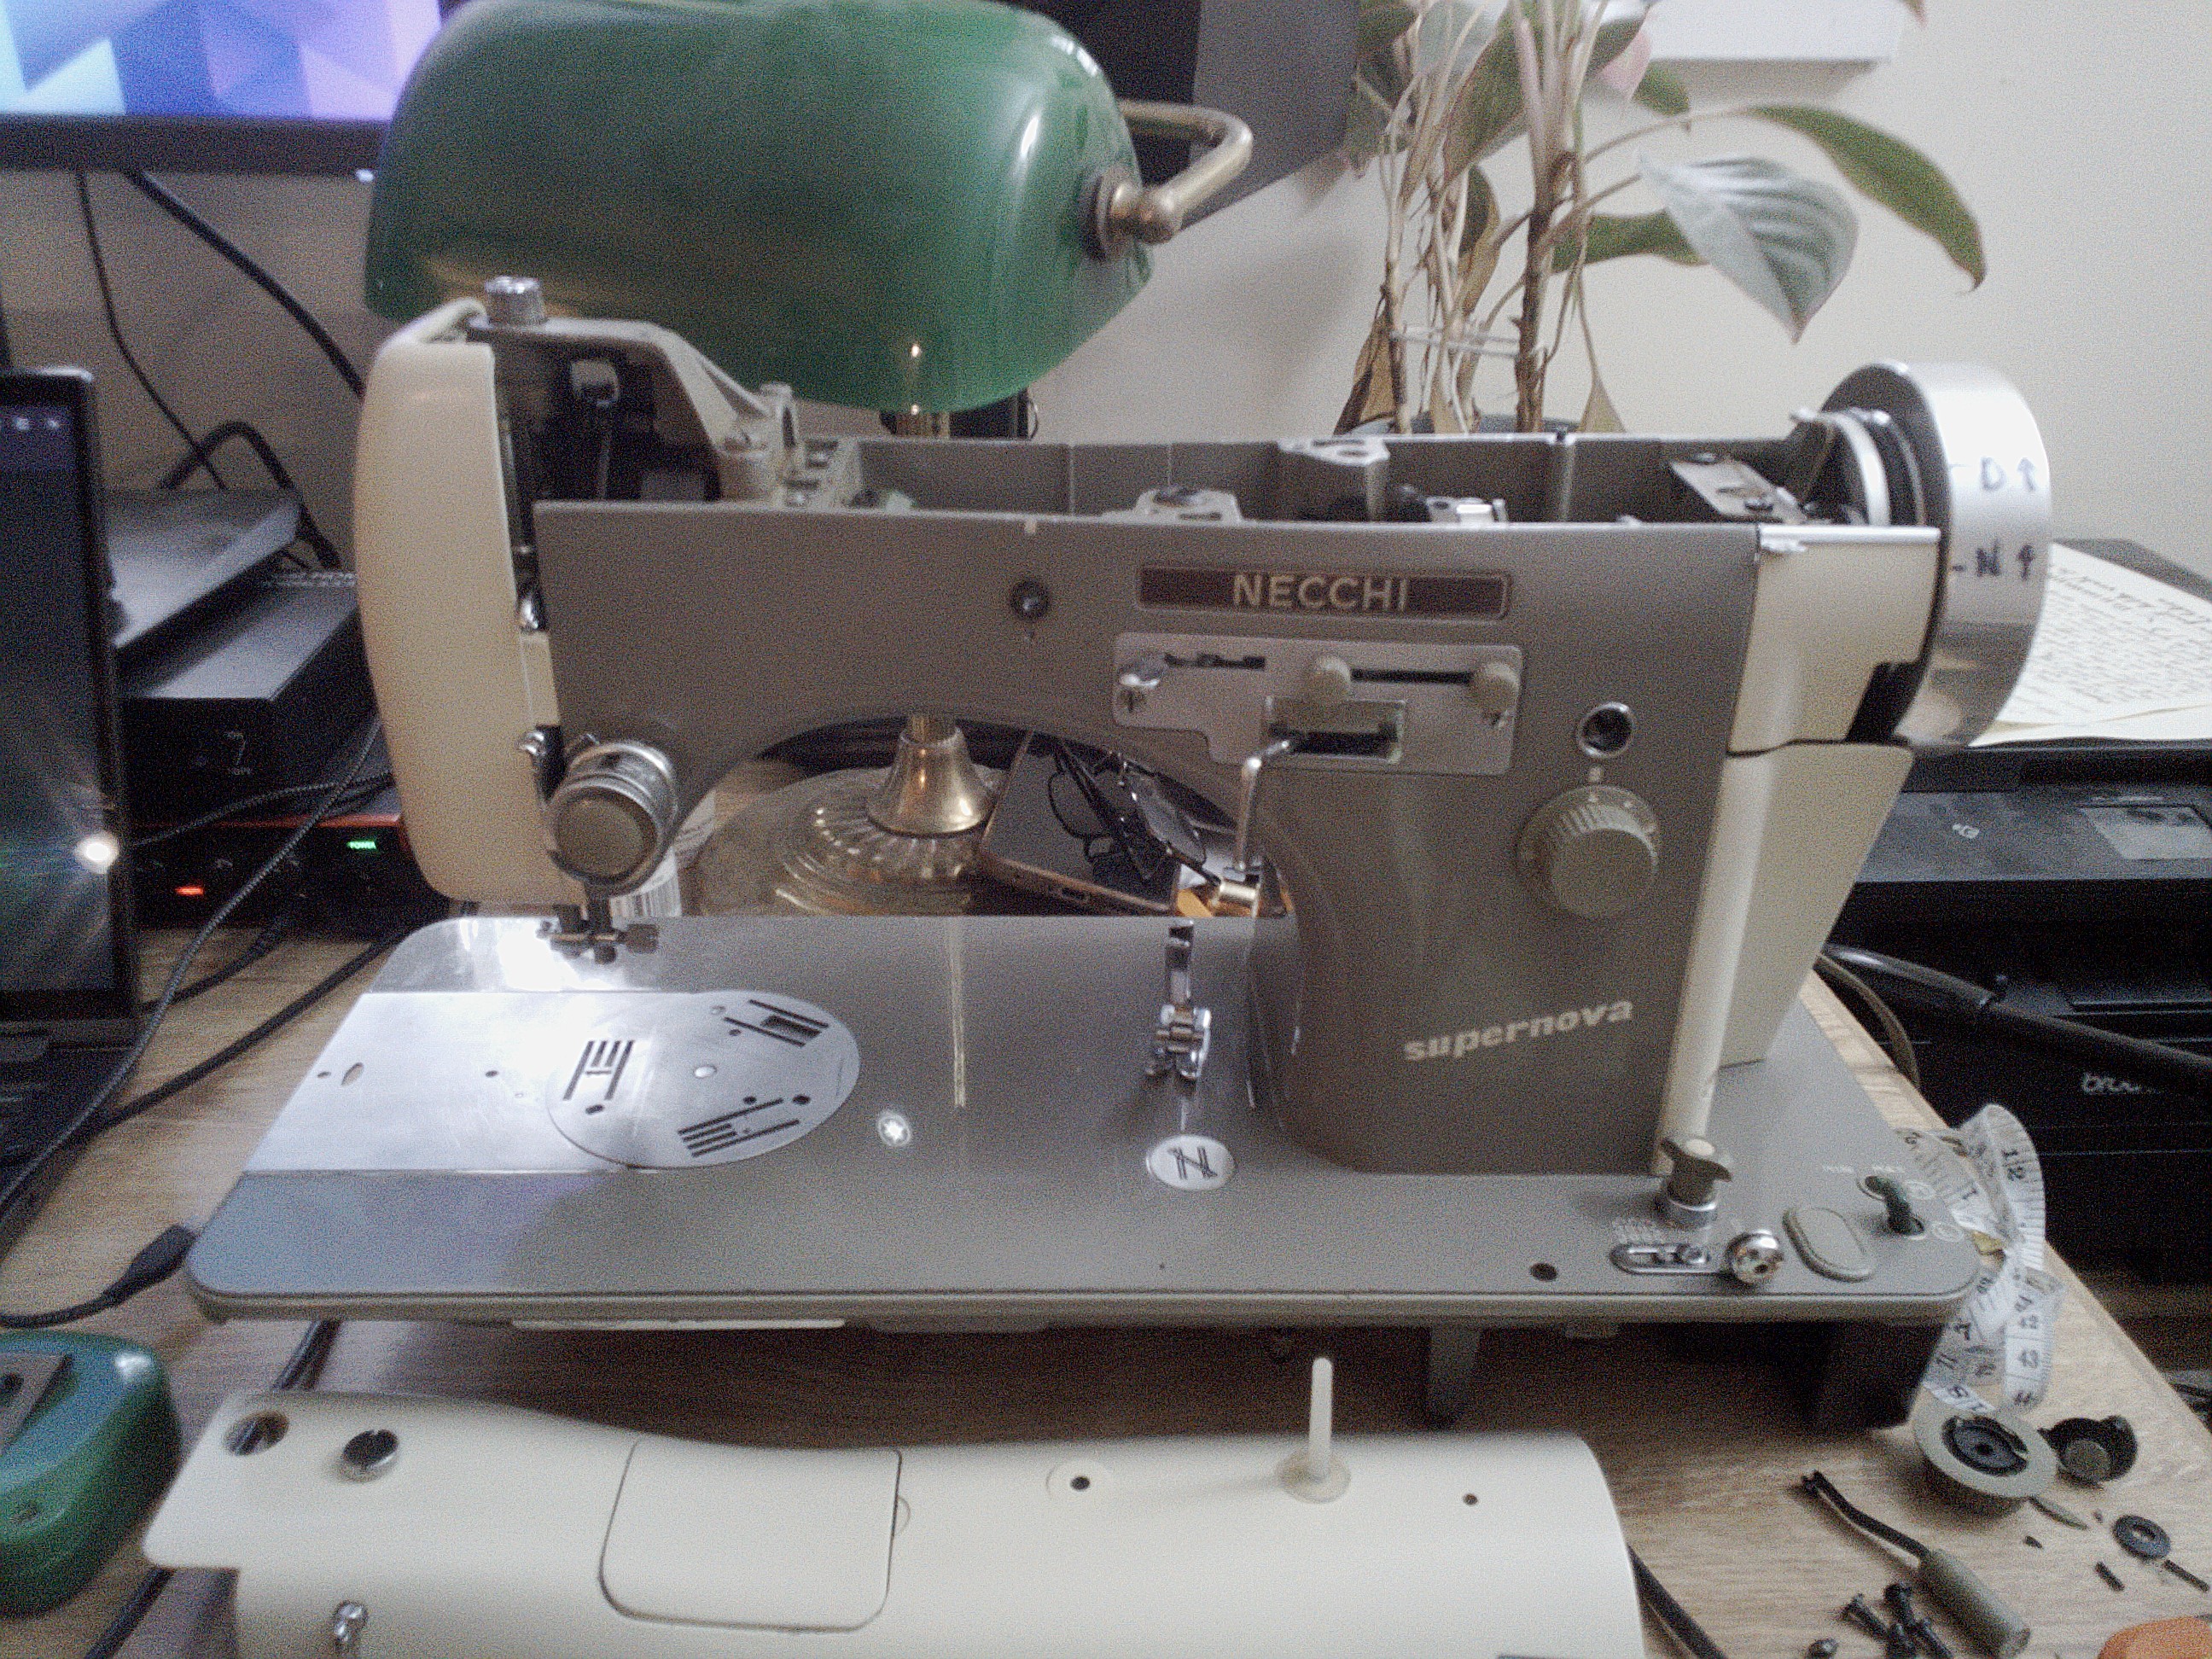 The Necchi Supernova without its embroidery unit, embroidery unit speed knob, and reverse button